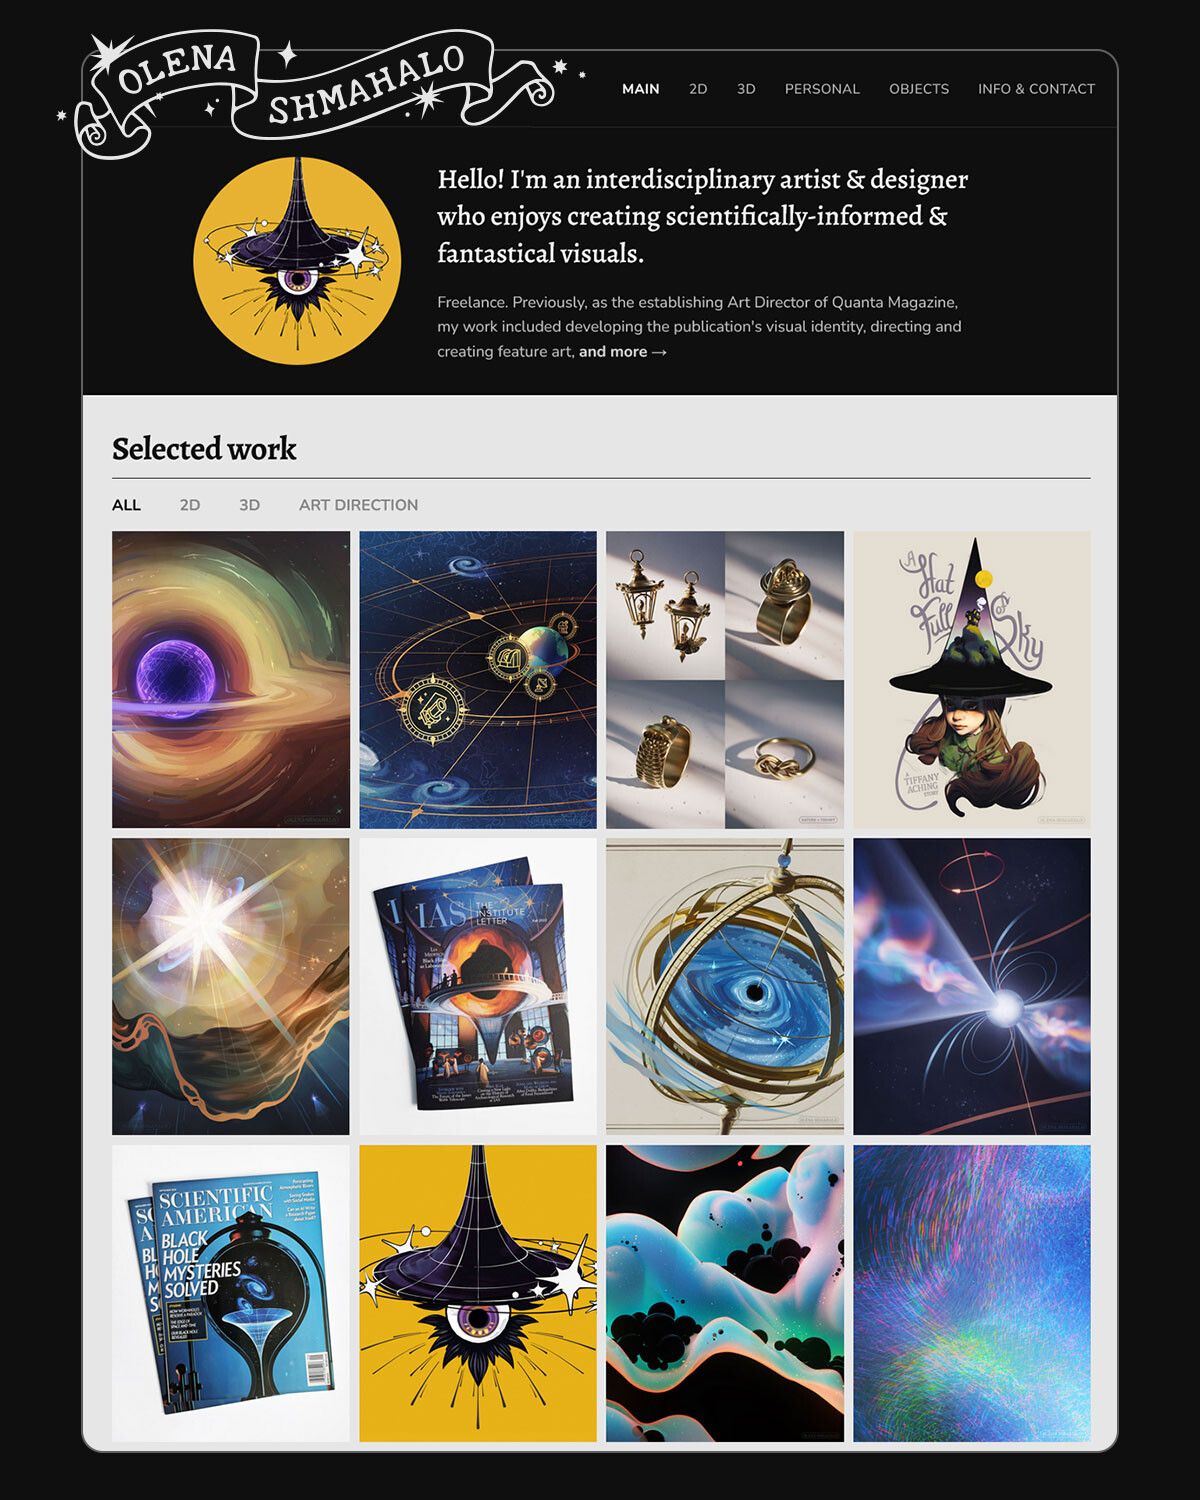 My latest work is exclusively on:
https://www.olenashmahalo.com/

Epic/ArtStation prioritized "AI" over artists. I no longer update here.

Find me elsewhere:
https://linktr.ee/NatureInTheory

—
https://tinyurl.com/SciAm-AI-Causes-Harm
